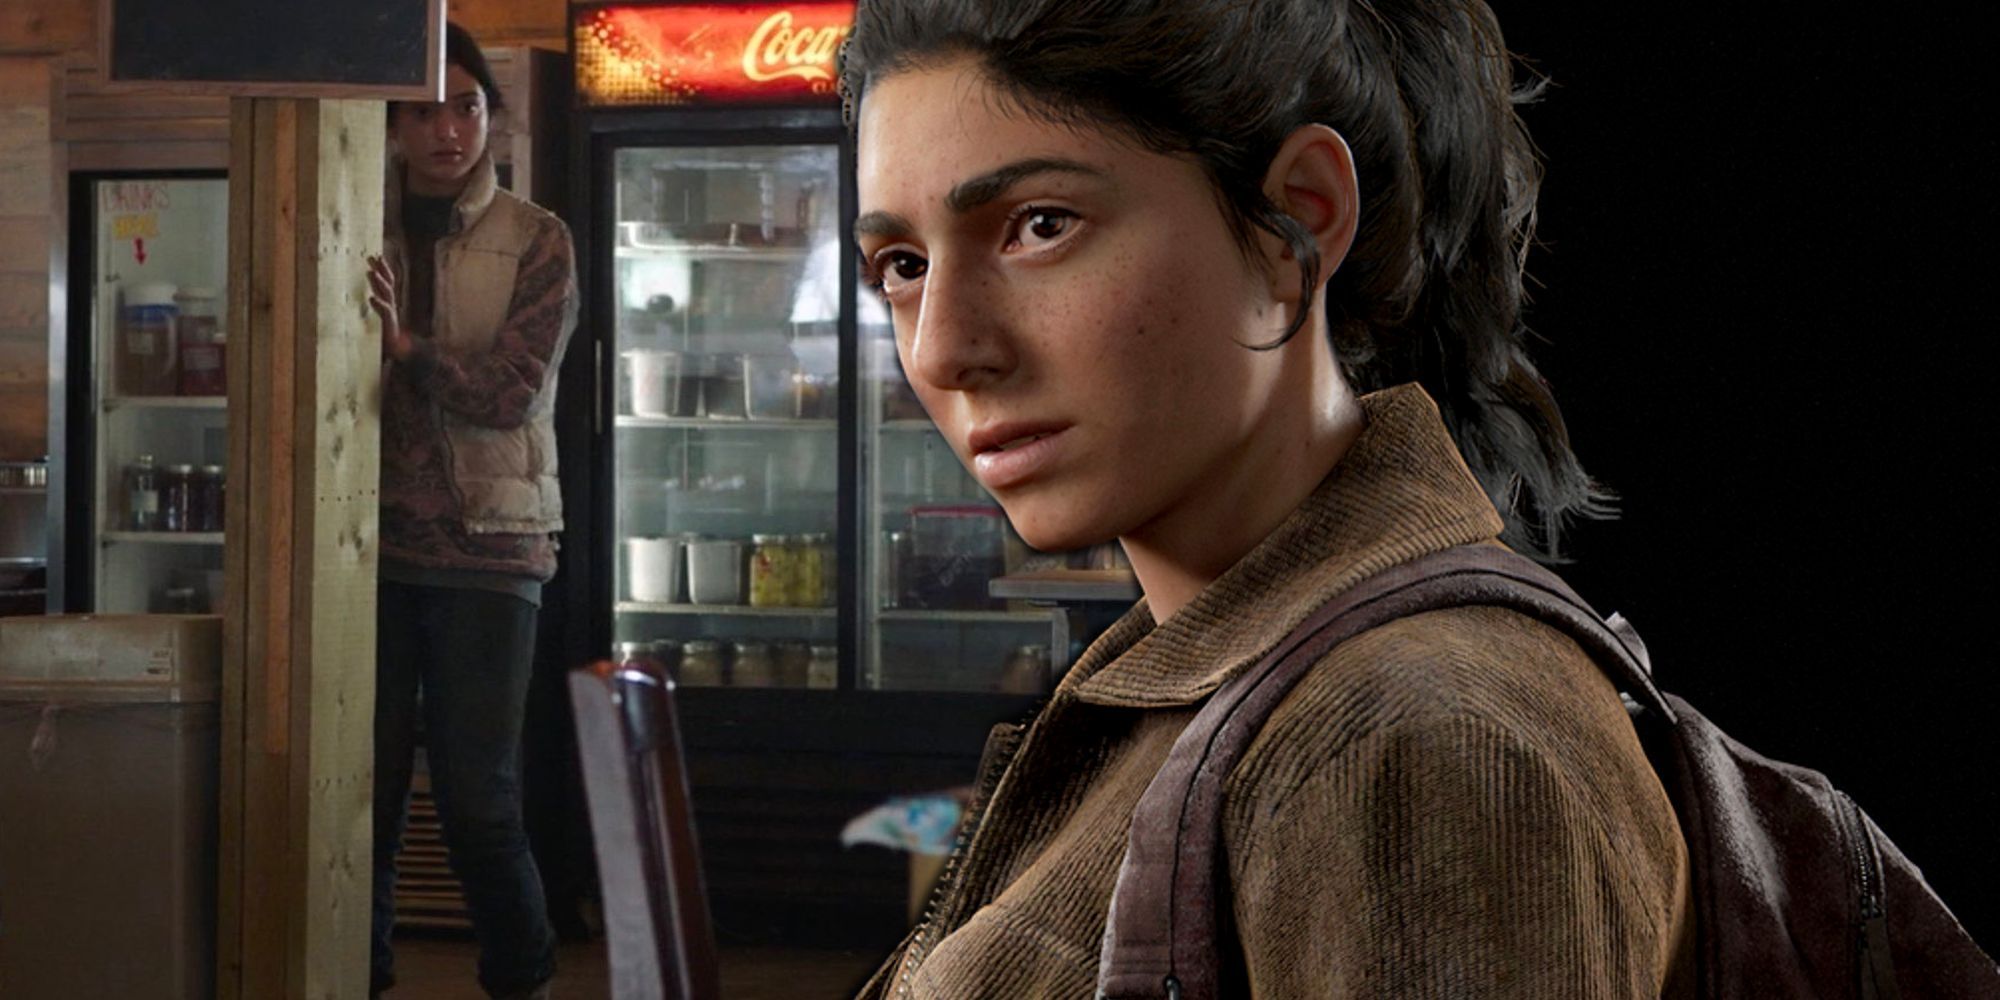 The Last of Us' episode 6: 'Kin' release time, preview. Ellie and